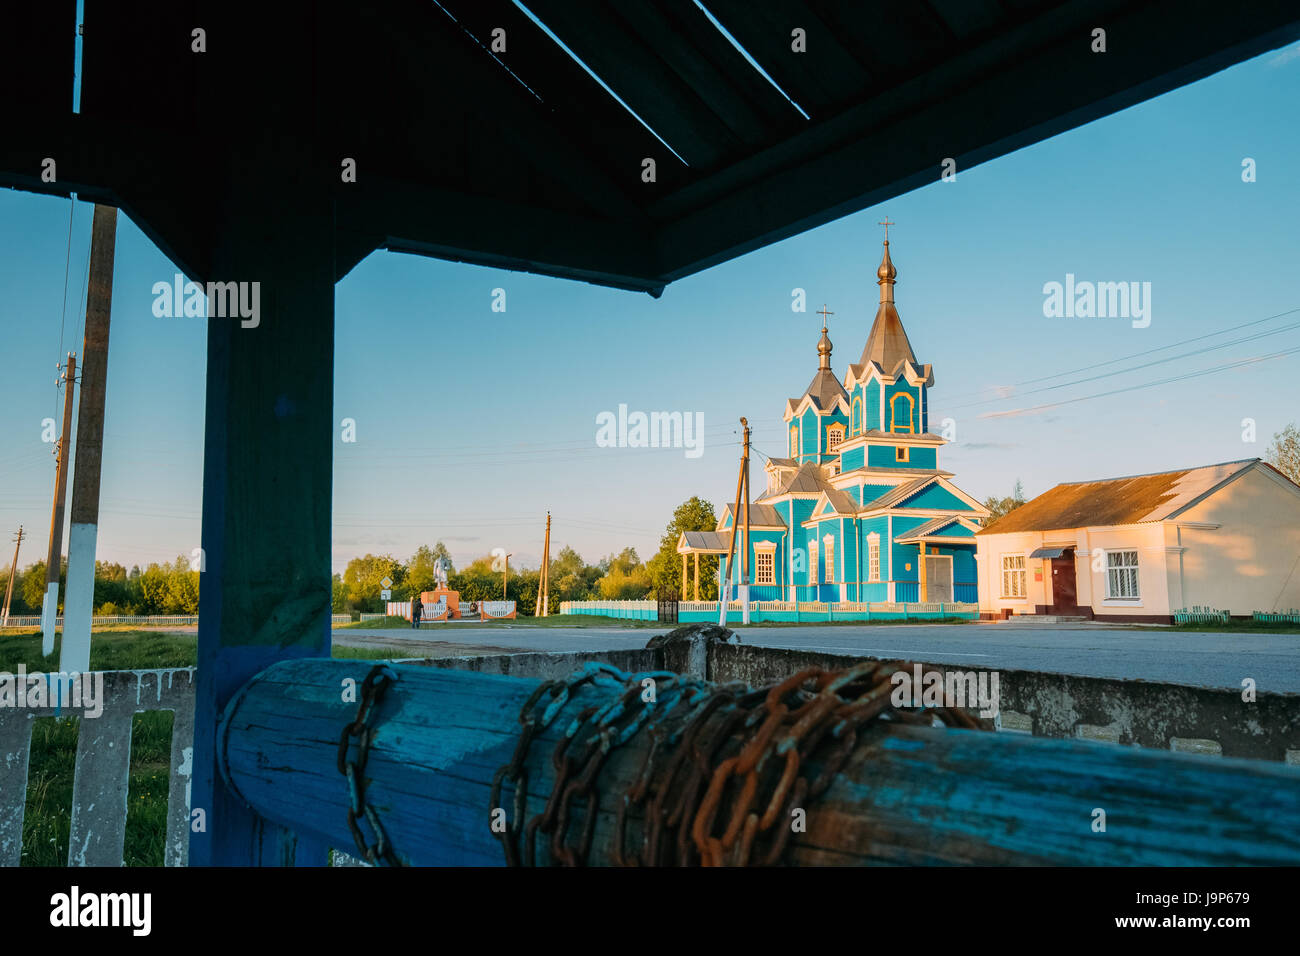 Old Wooden Orthodox Church Of The Nativity Of The Virgin Mary At Sunset In Village Krasnyy Partizan, Dobrush District, Gomel Region, Belarus. View Fro Stock Photo